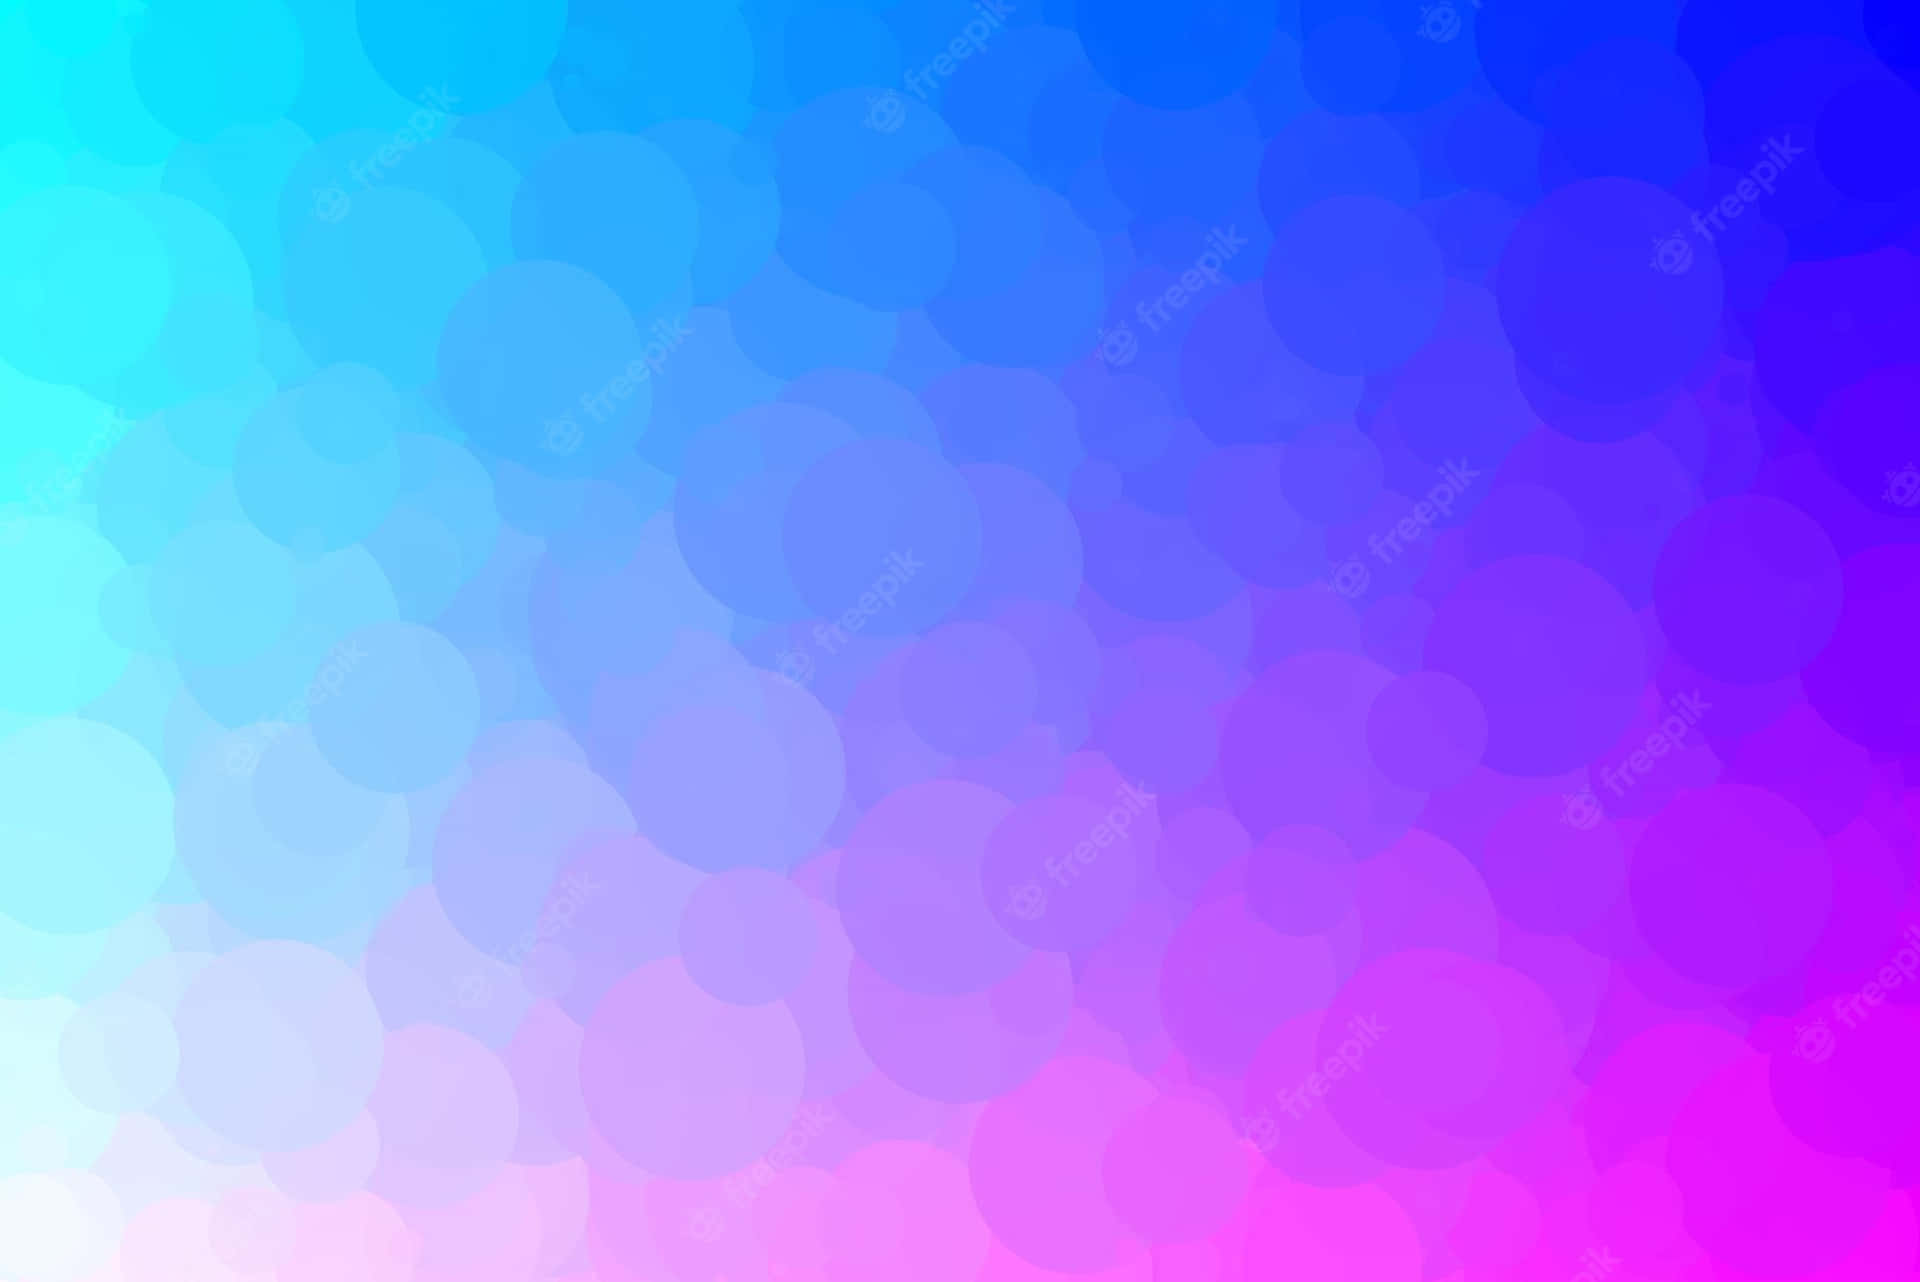 A Colorful Abstract Background With Blue, Pink And Purple Circles Wallpaper